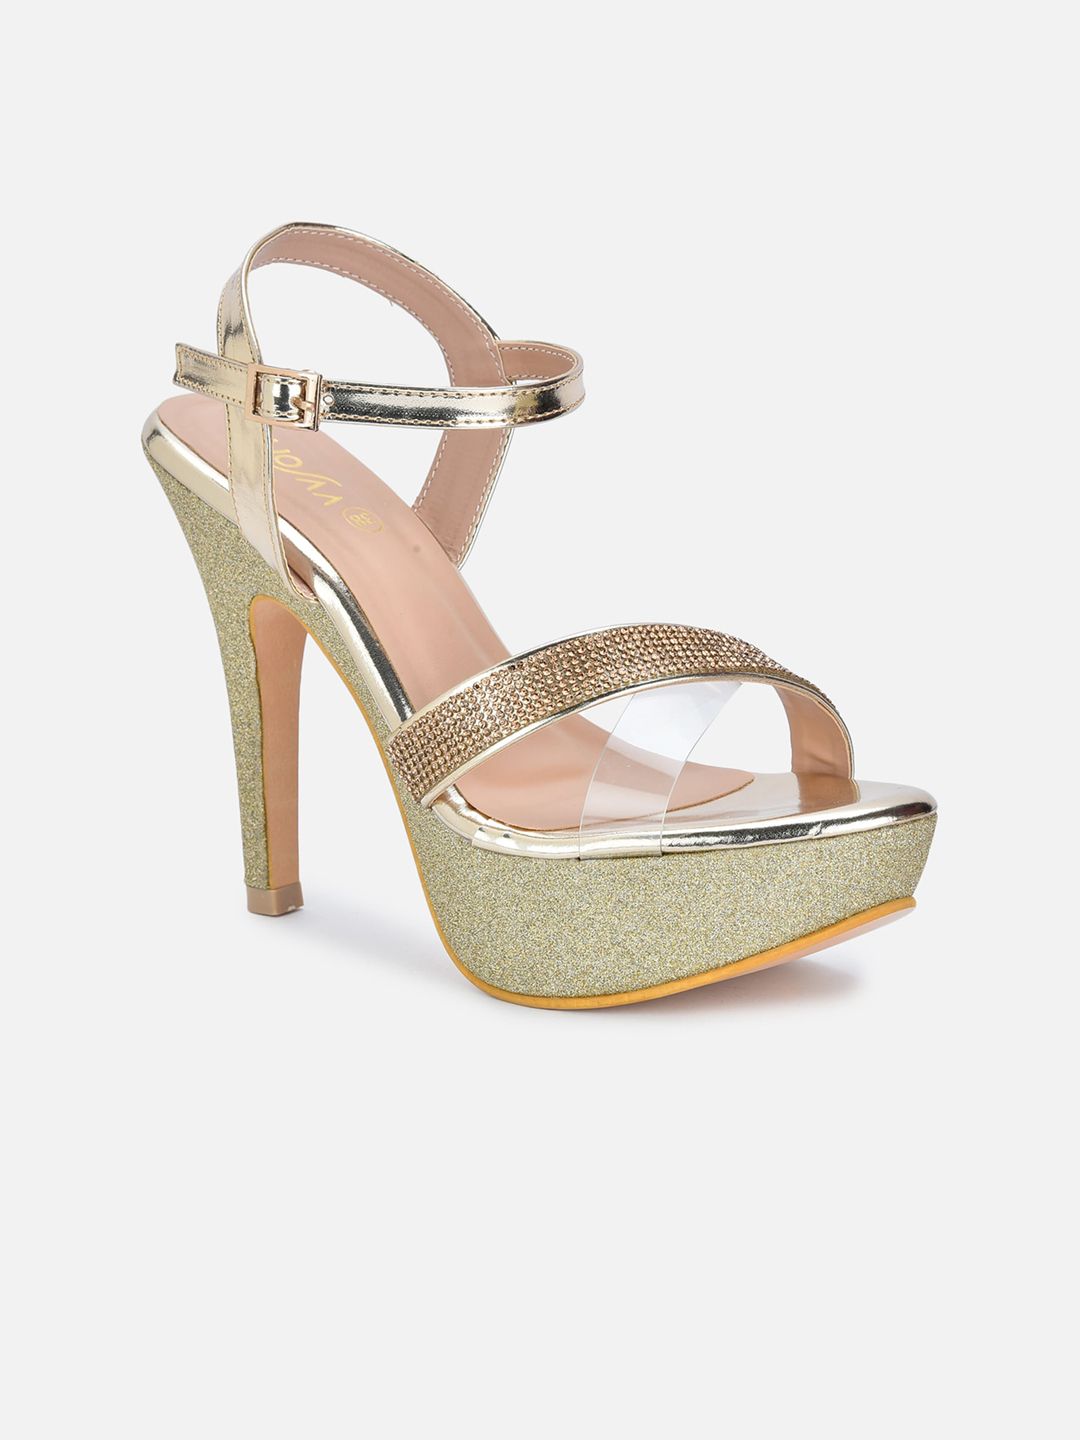 VALIOSAA Gold-Toned Party Stiletto Sandals Price in India